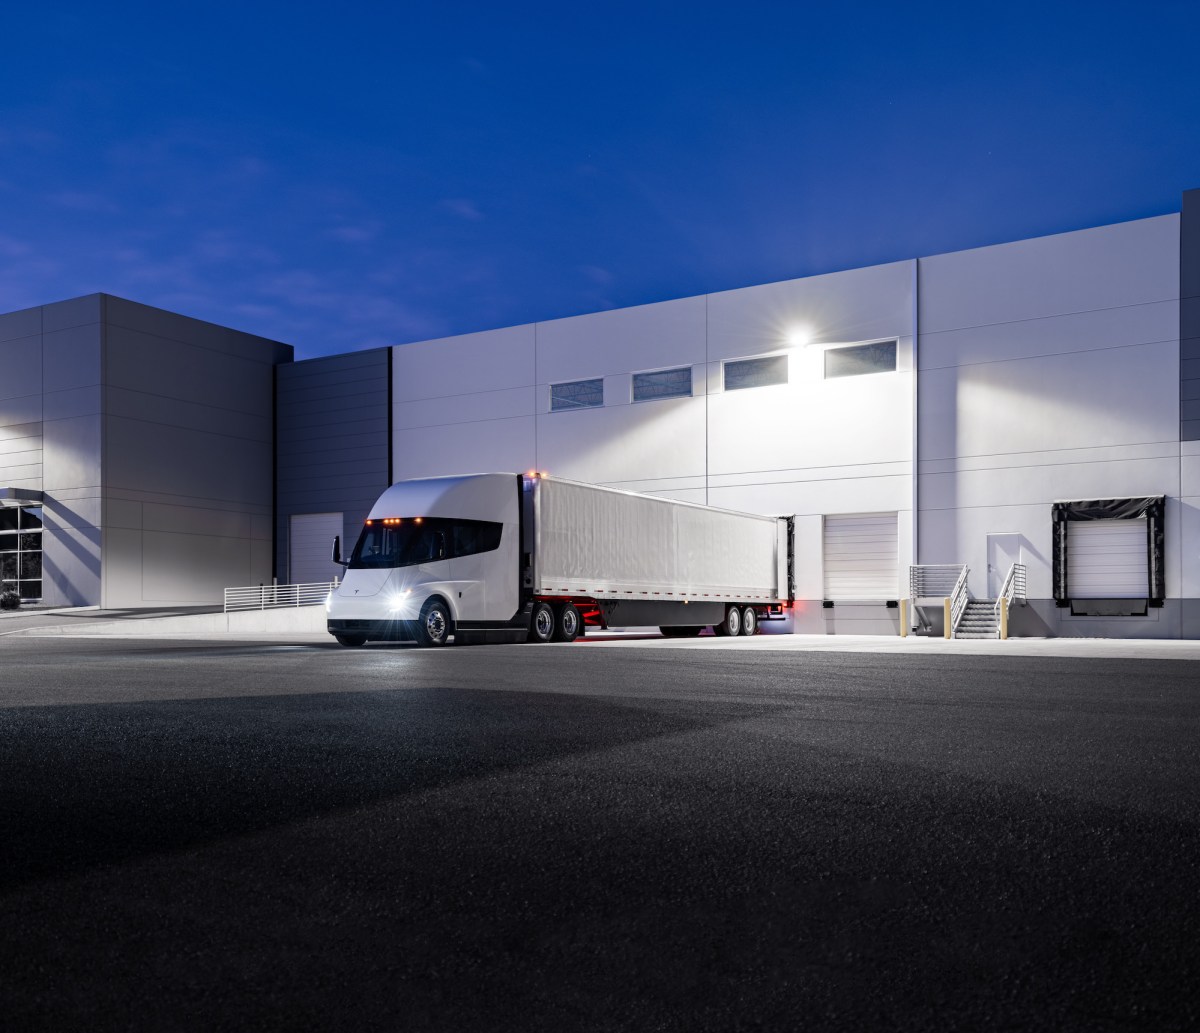 Tesla invests $3.6B in two new Nevada factories to build Semis and cells